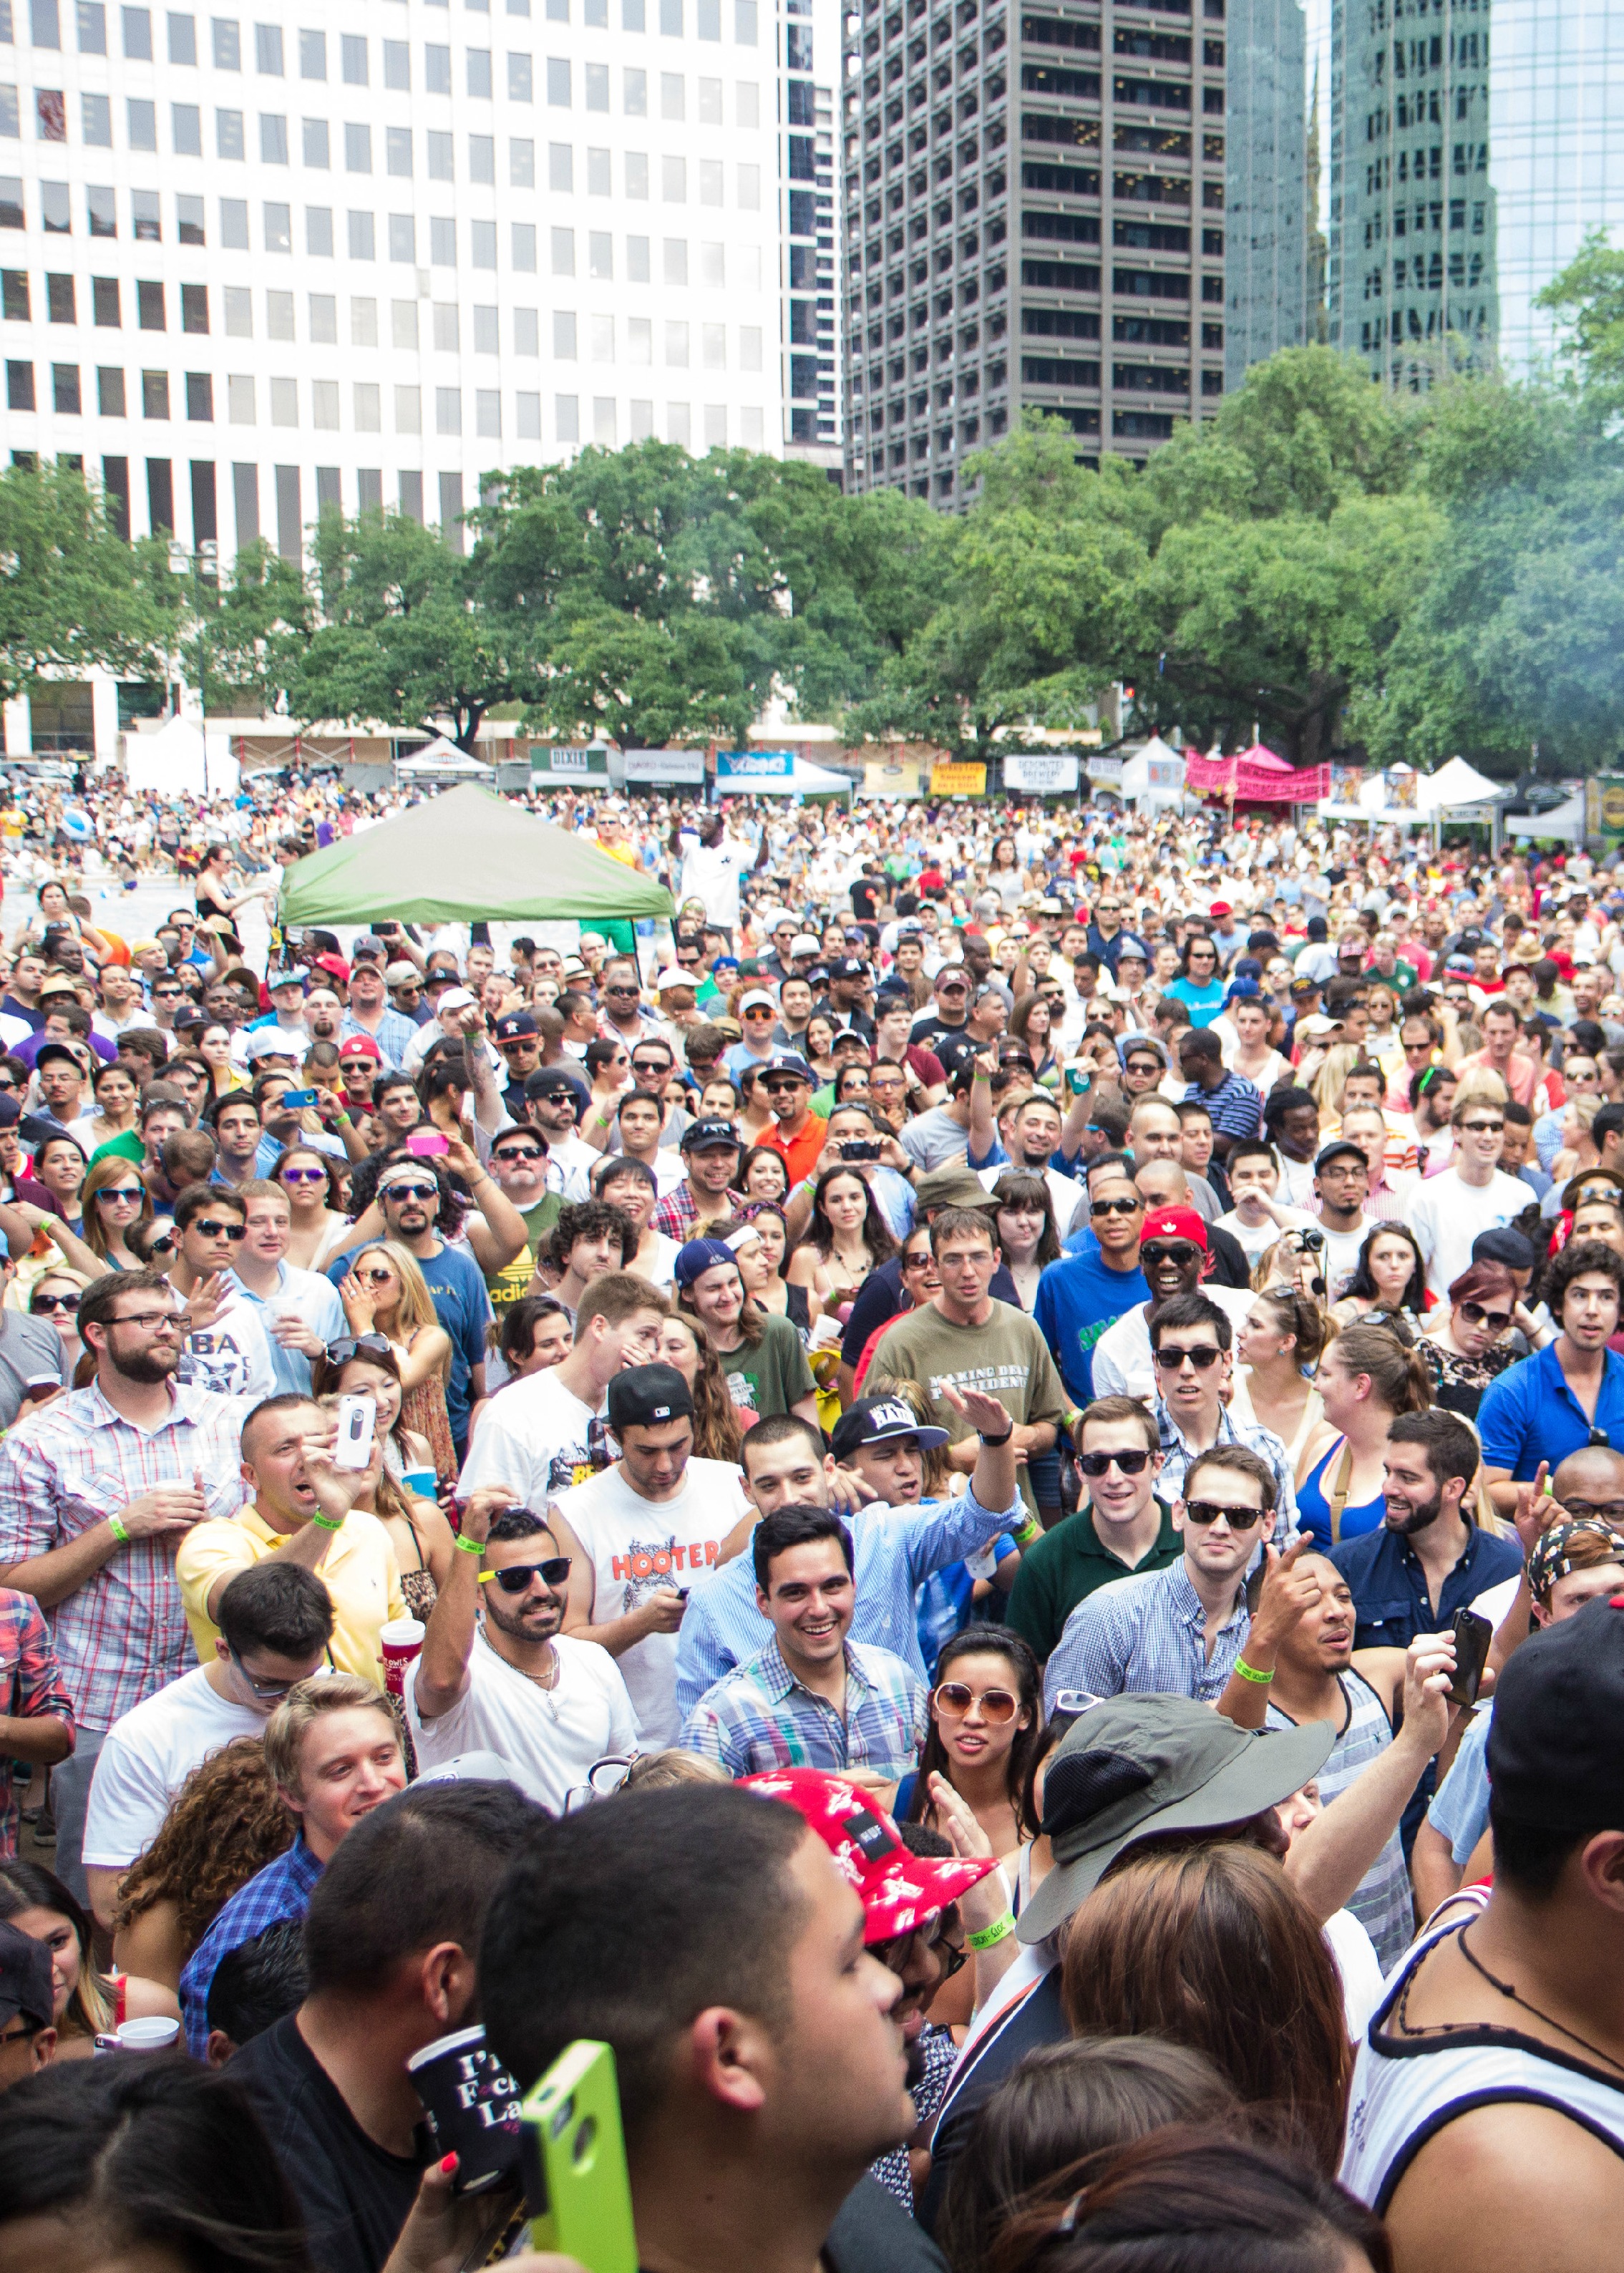 Houston Beer Fest Tickets on Sale Now